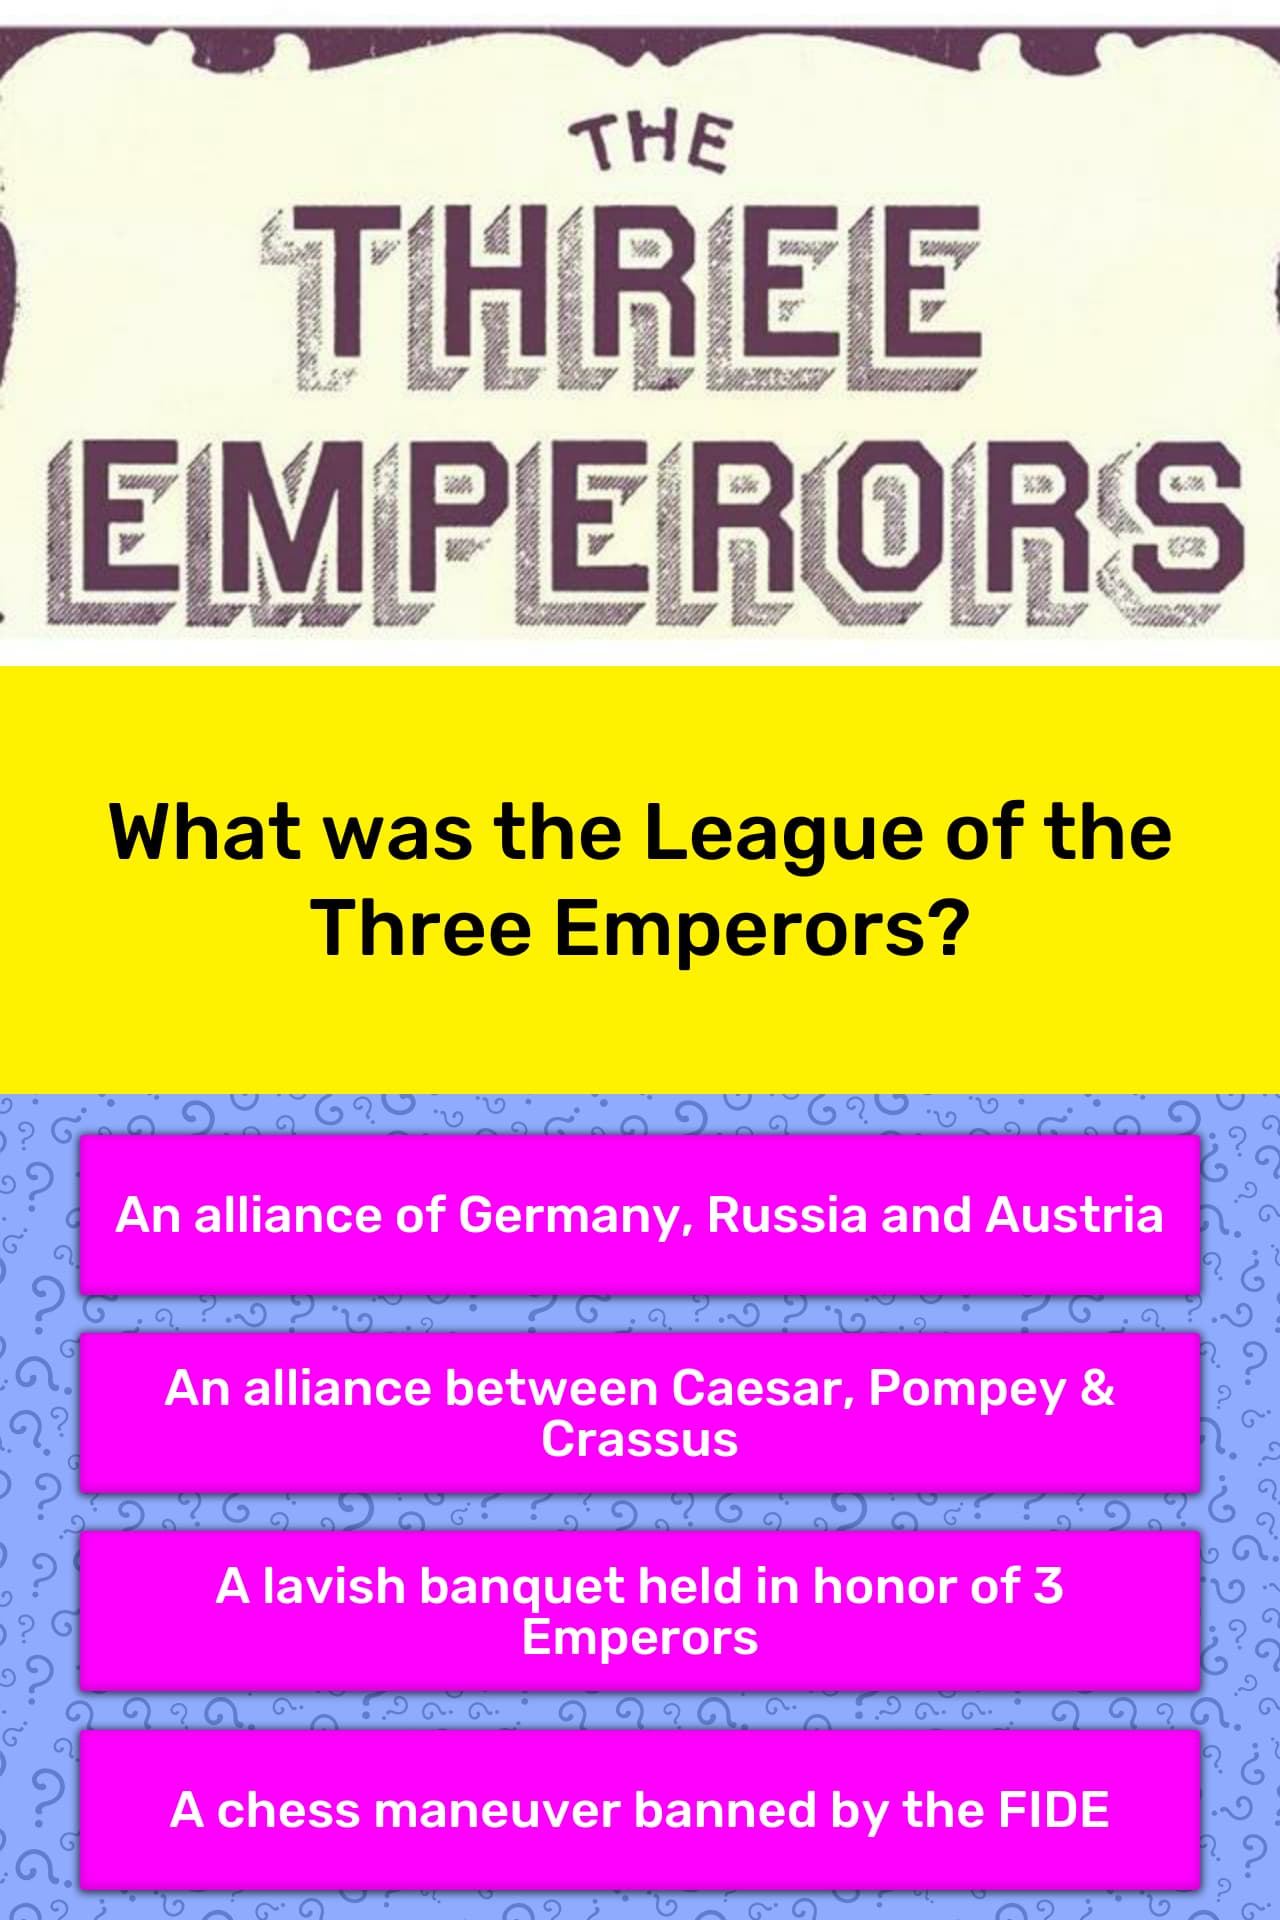 league of three emperors 1873 significance